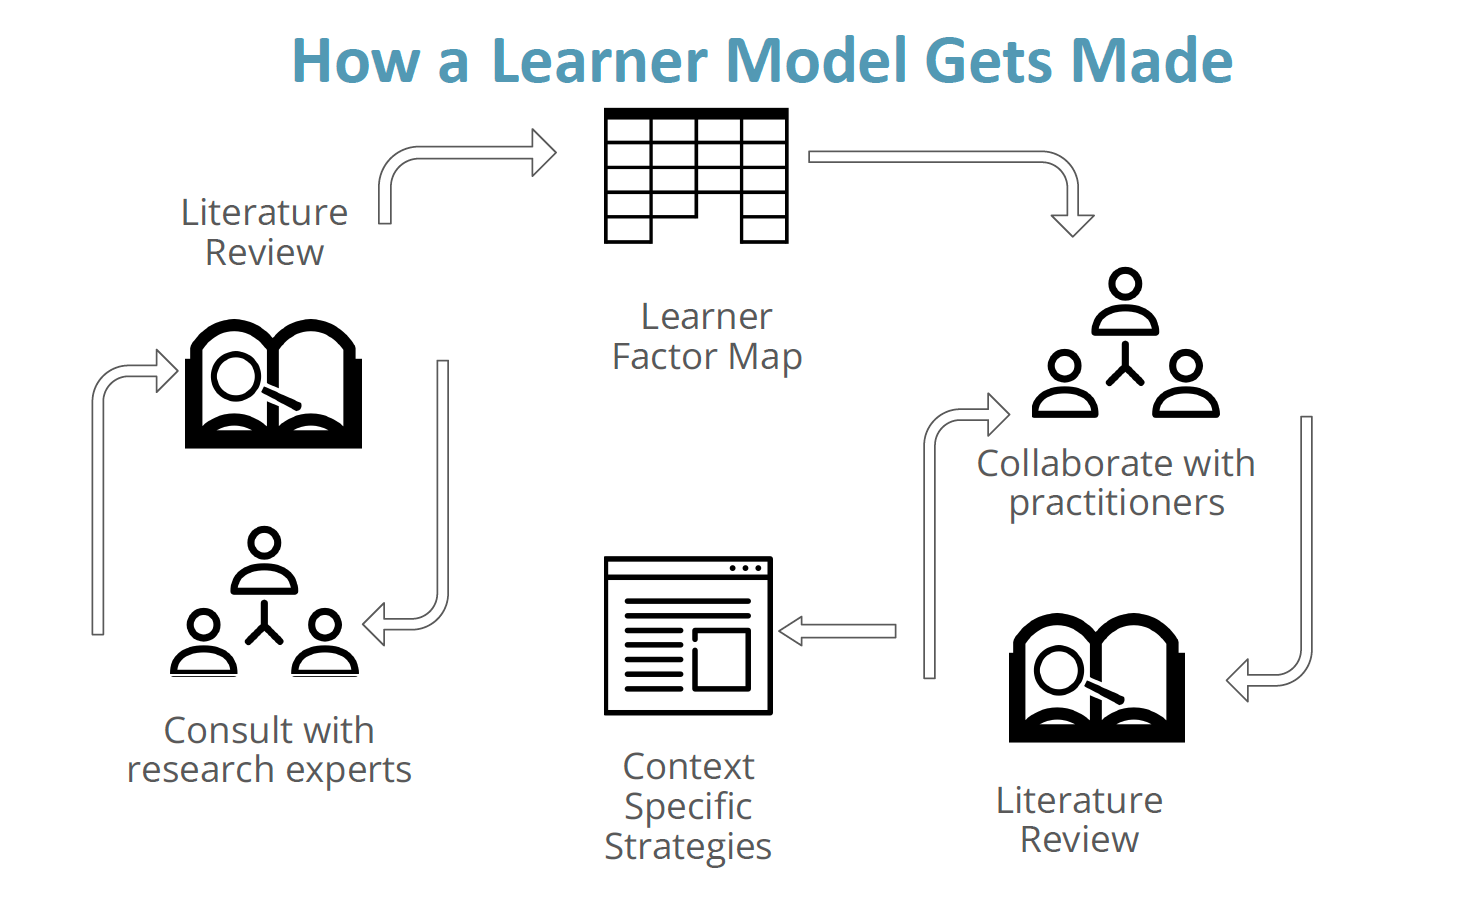 Process outlining the cycles of work to create a learner model, going from literature review with experts to creating a factor map to identifying context-specific strategies with practitioners.